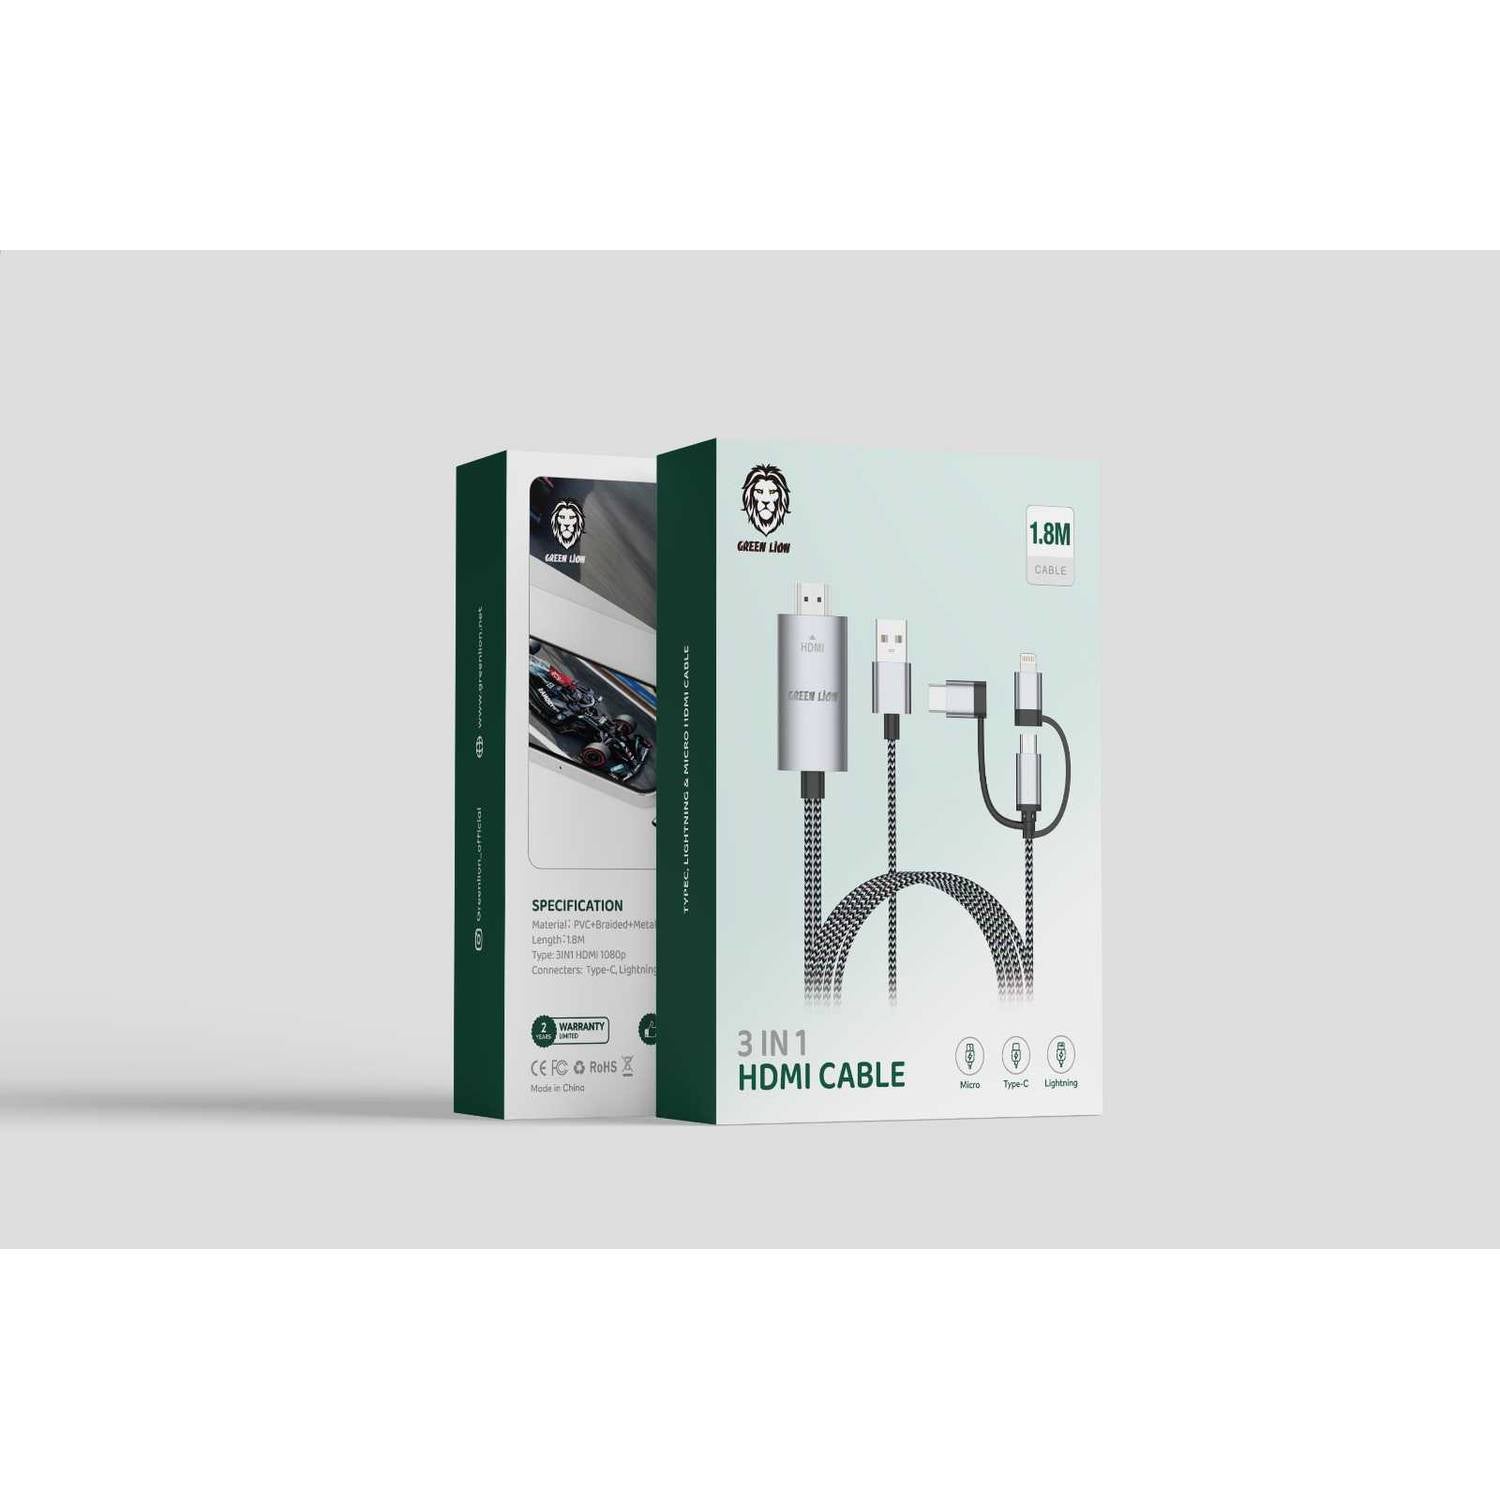 GREEN LION 3 IN 1 HDMI CABLE